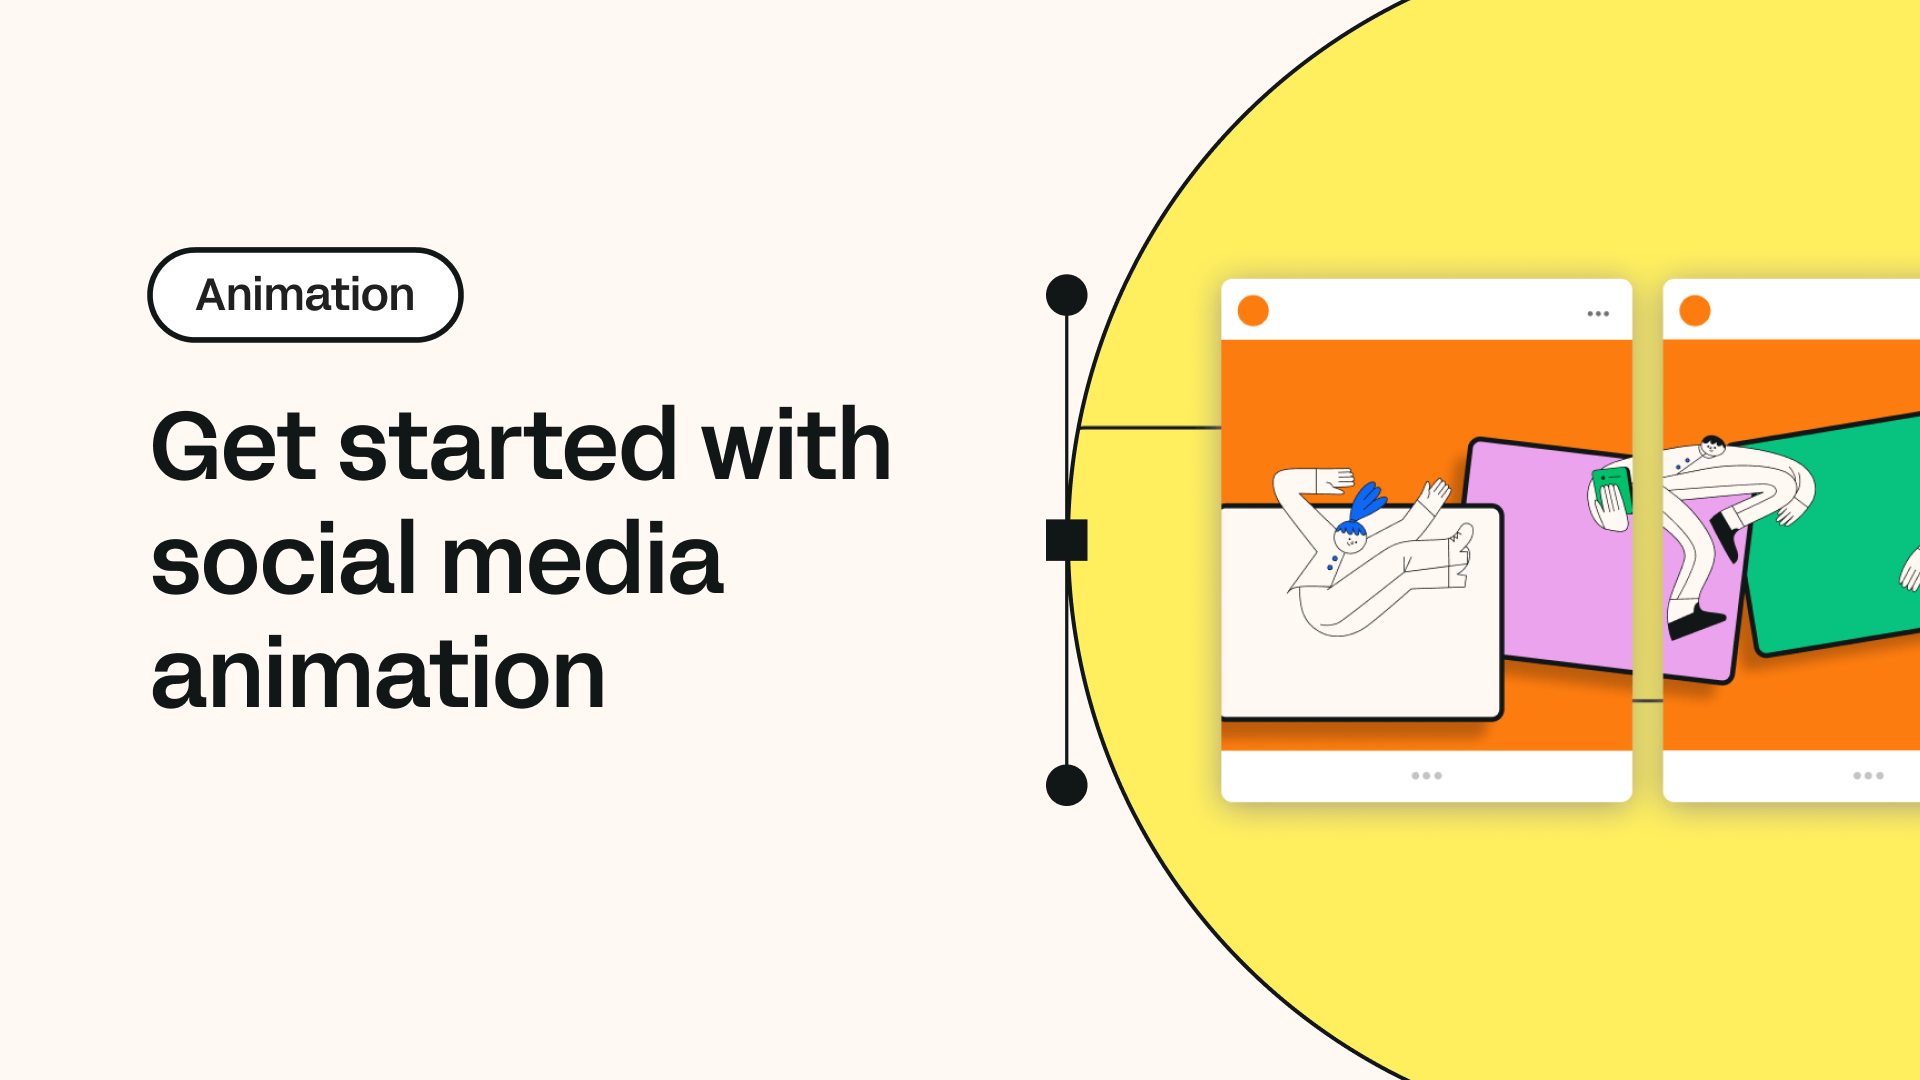 Get started with social media animation